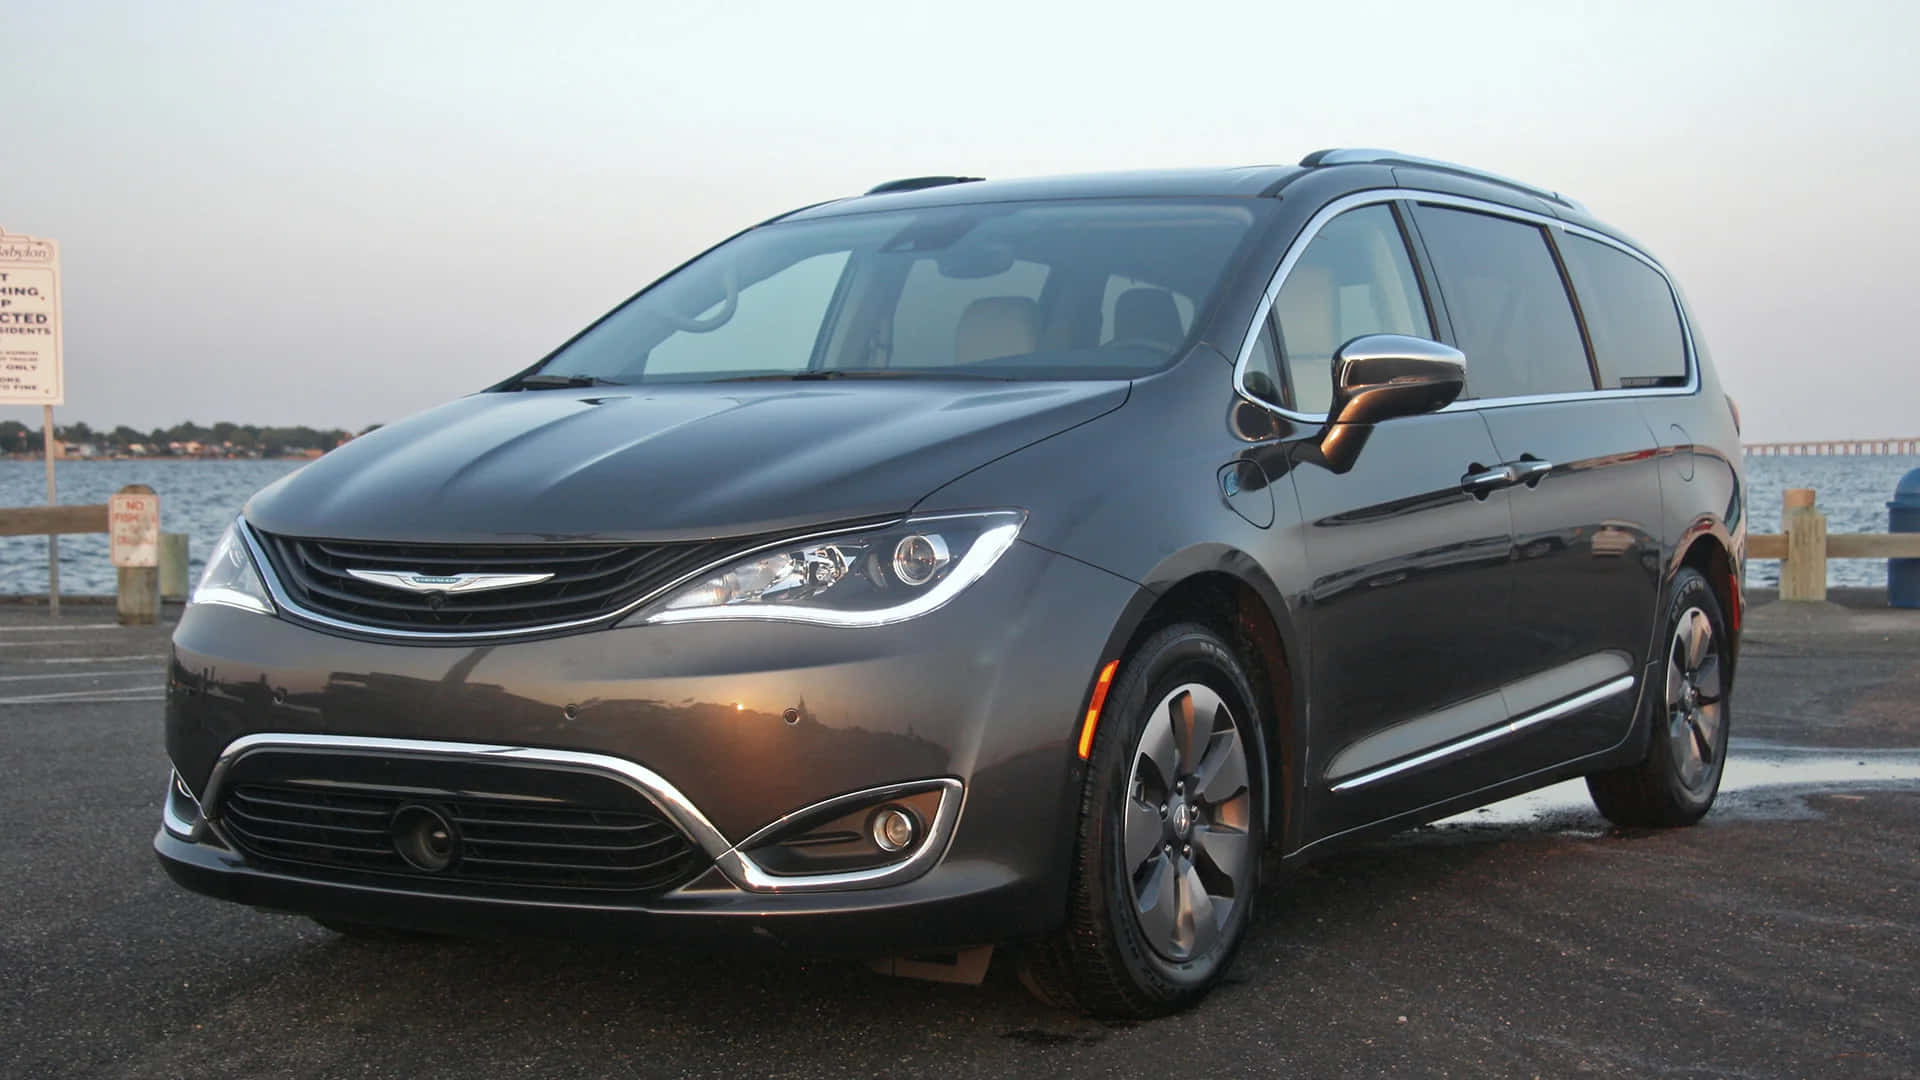 Caption: The Luxurious Chrysler Pacifica on a Scenic Drive Wallpaper